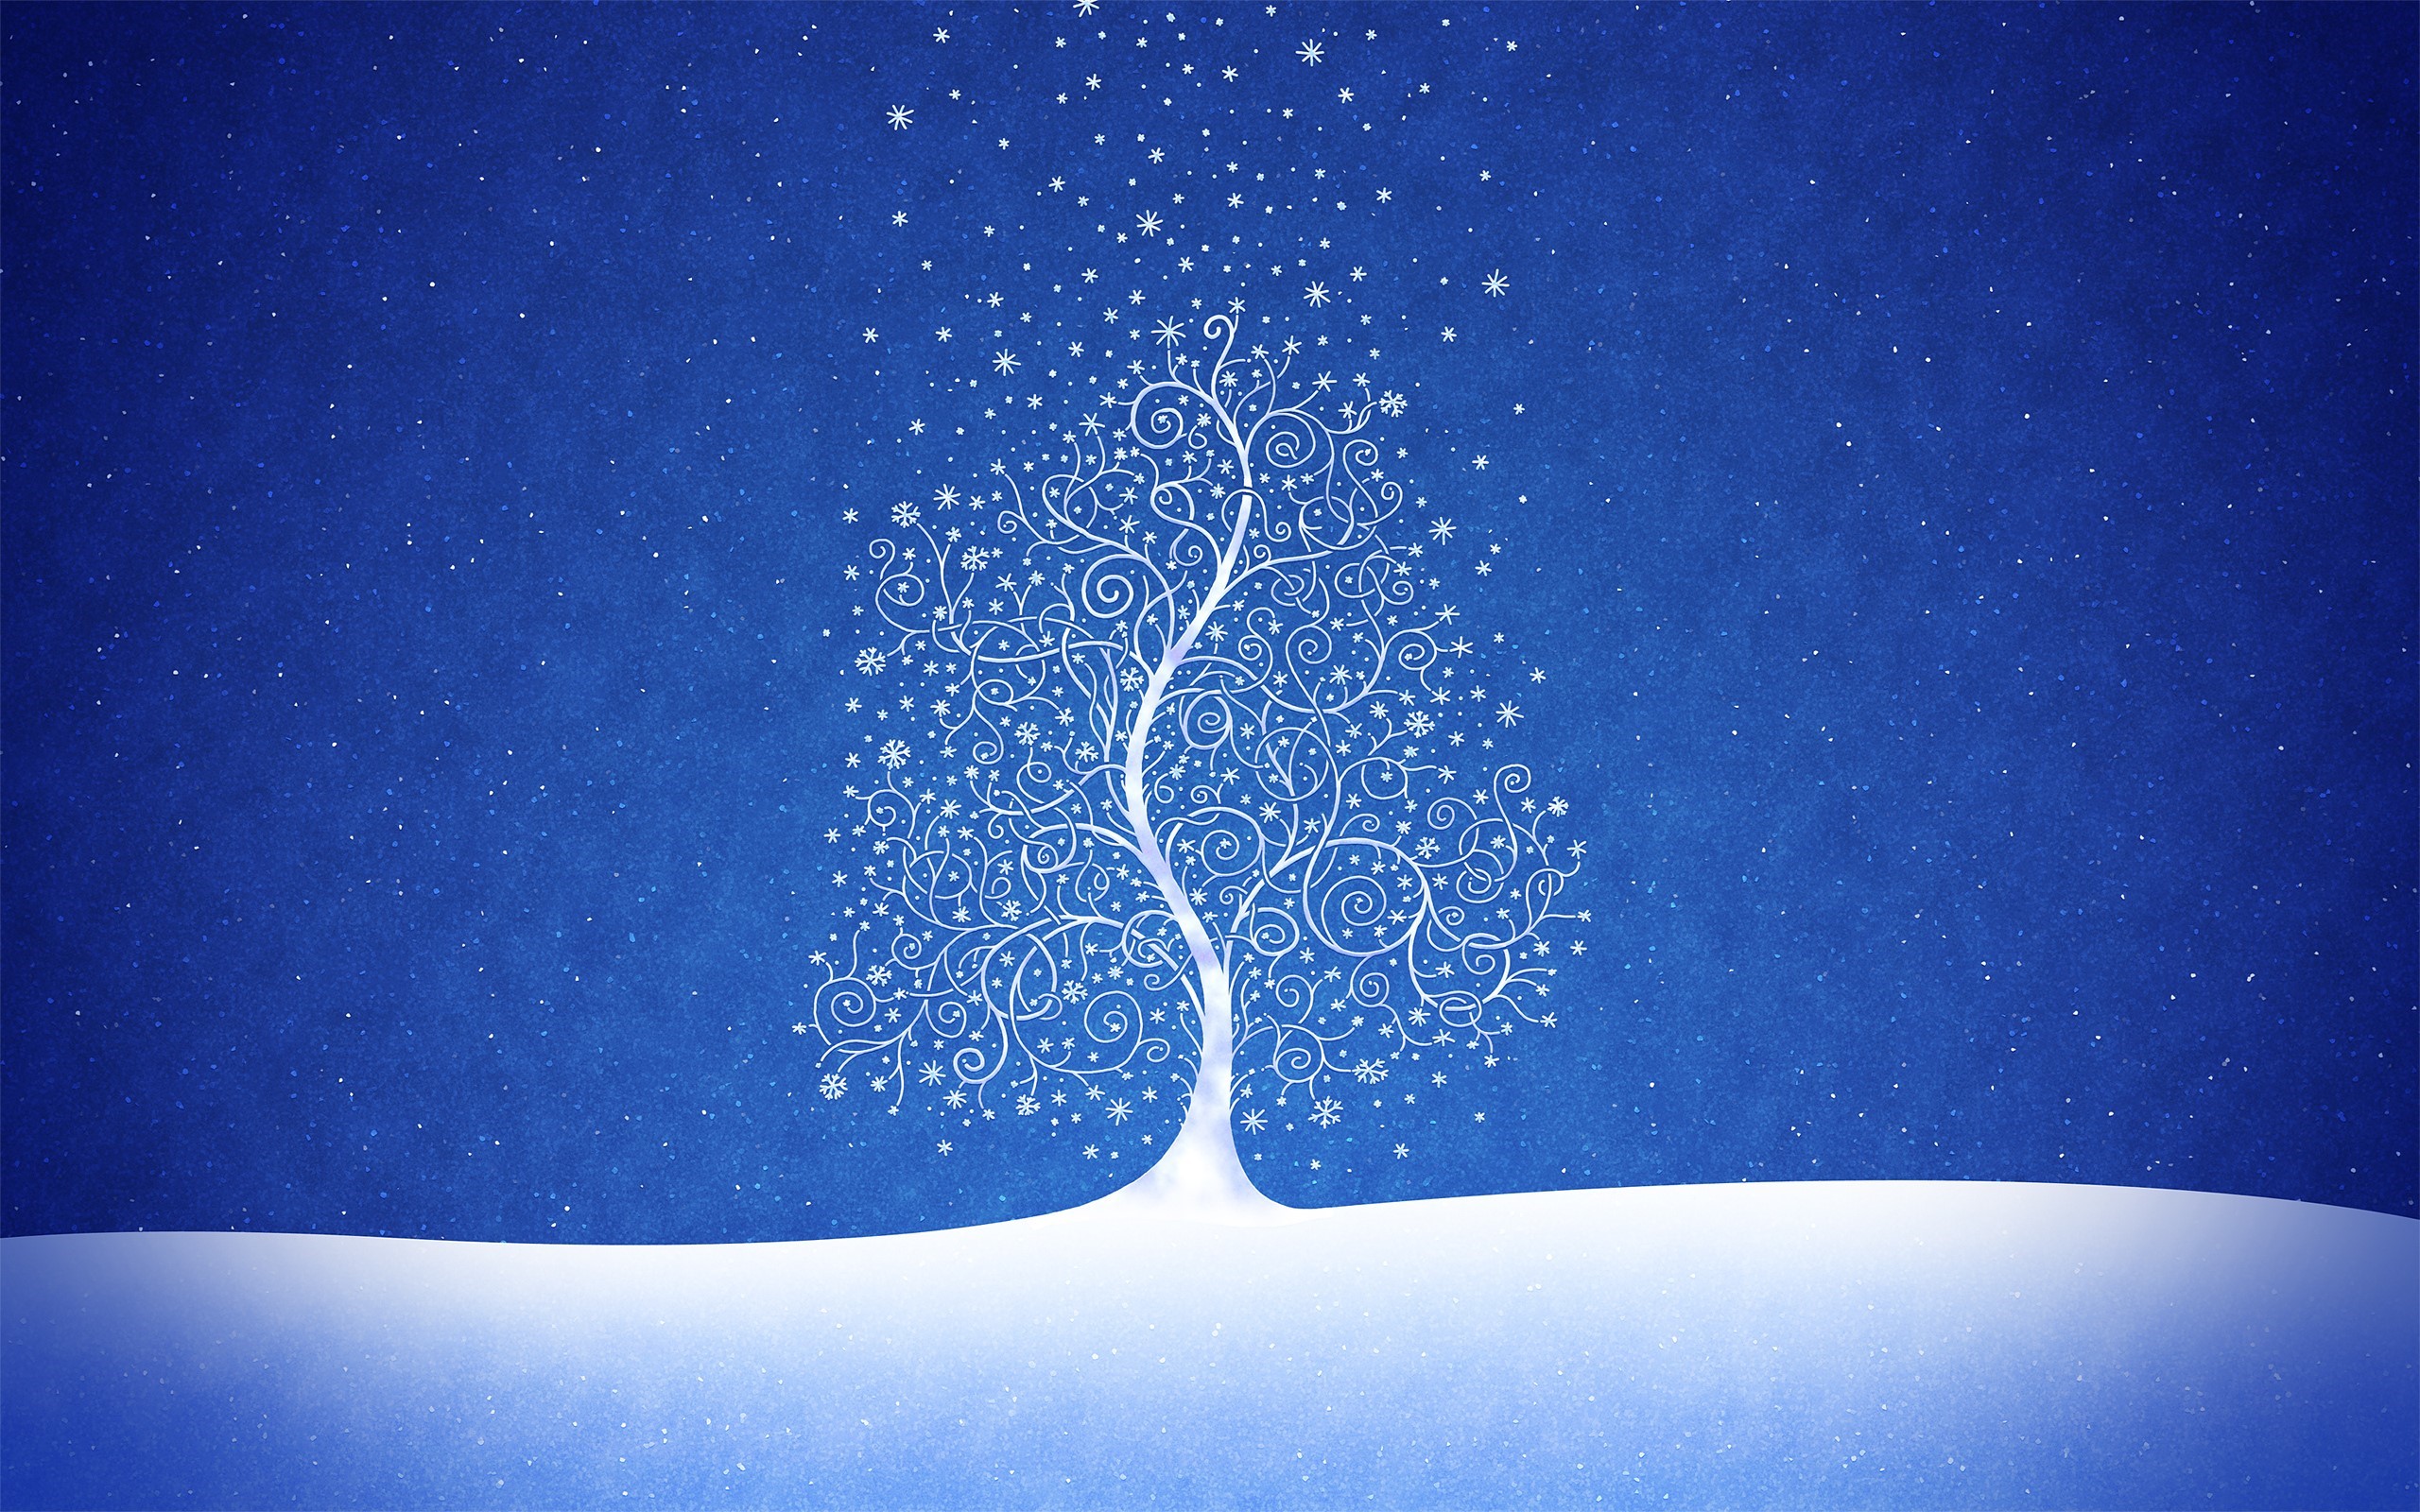 Snowy Type Tree Design Image HD Wallpapers 2560x1600